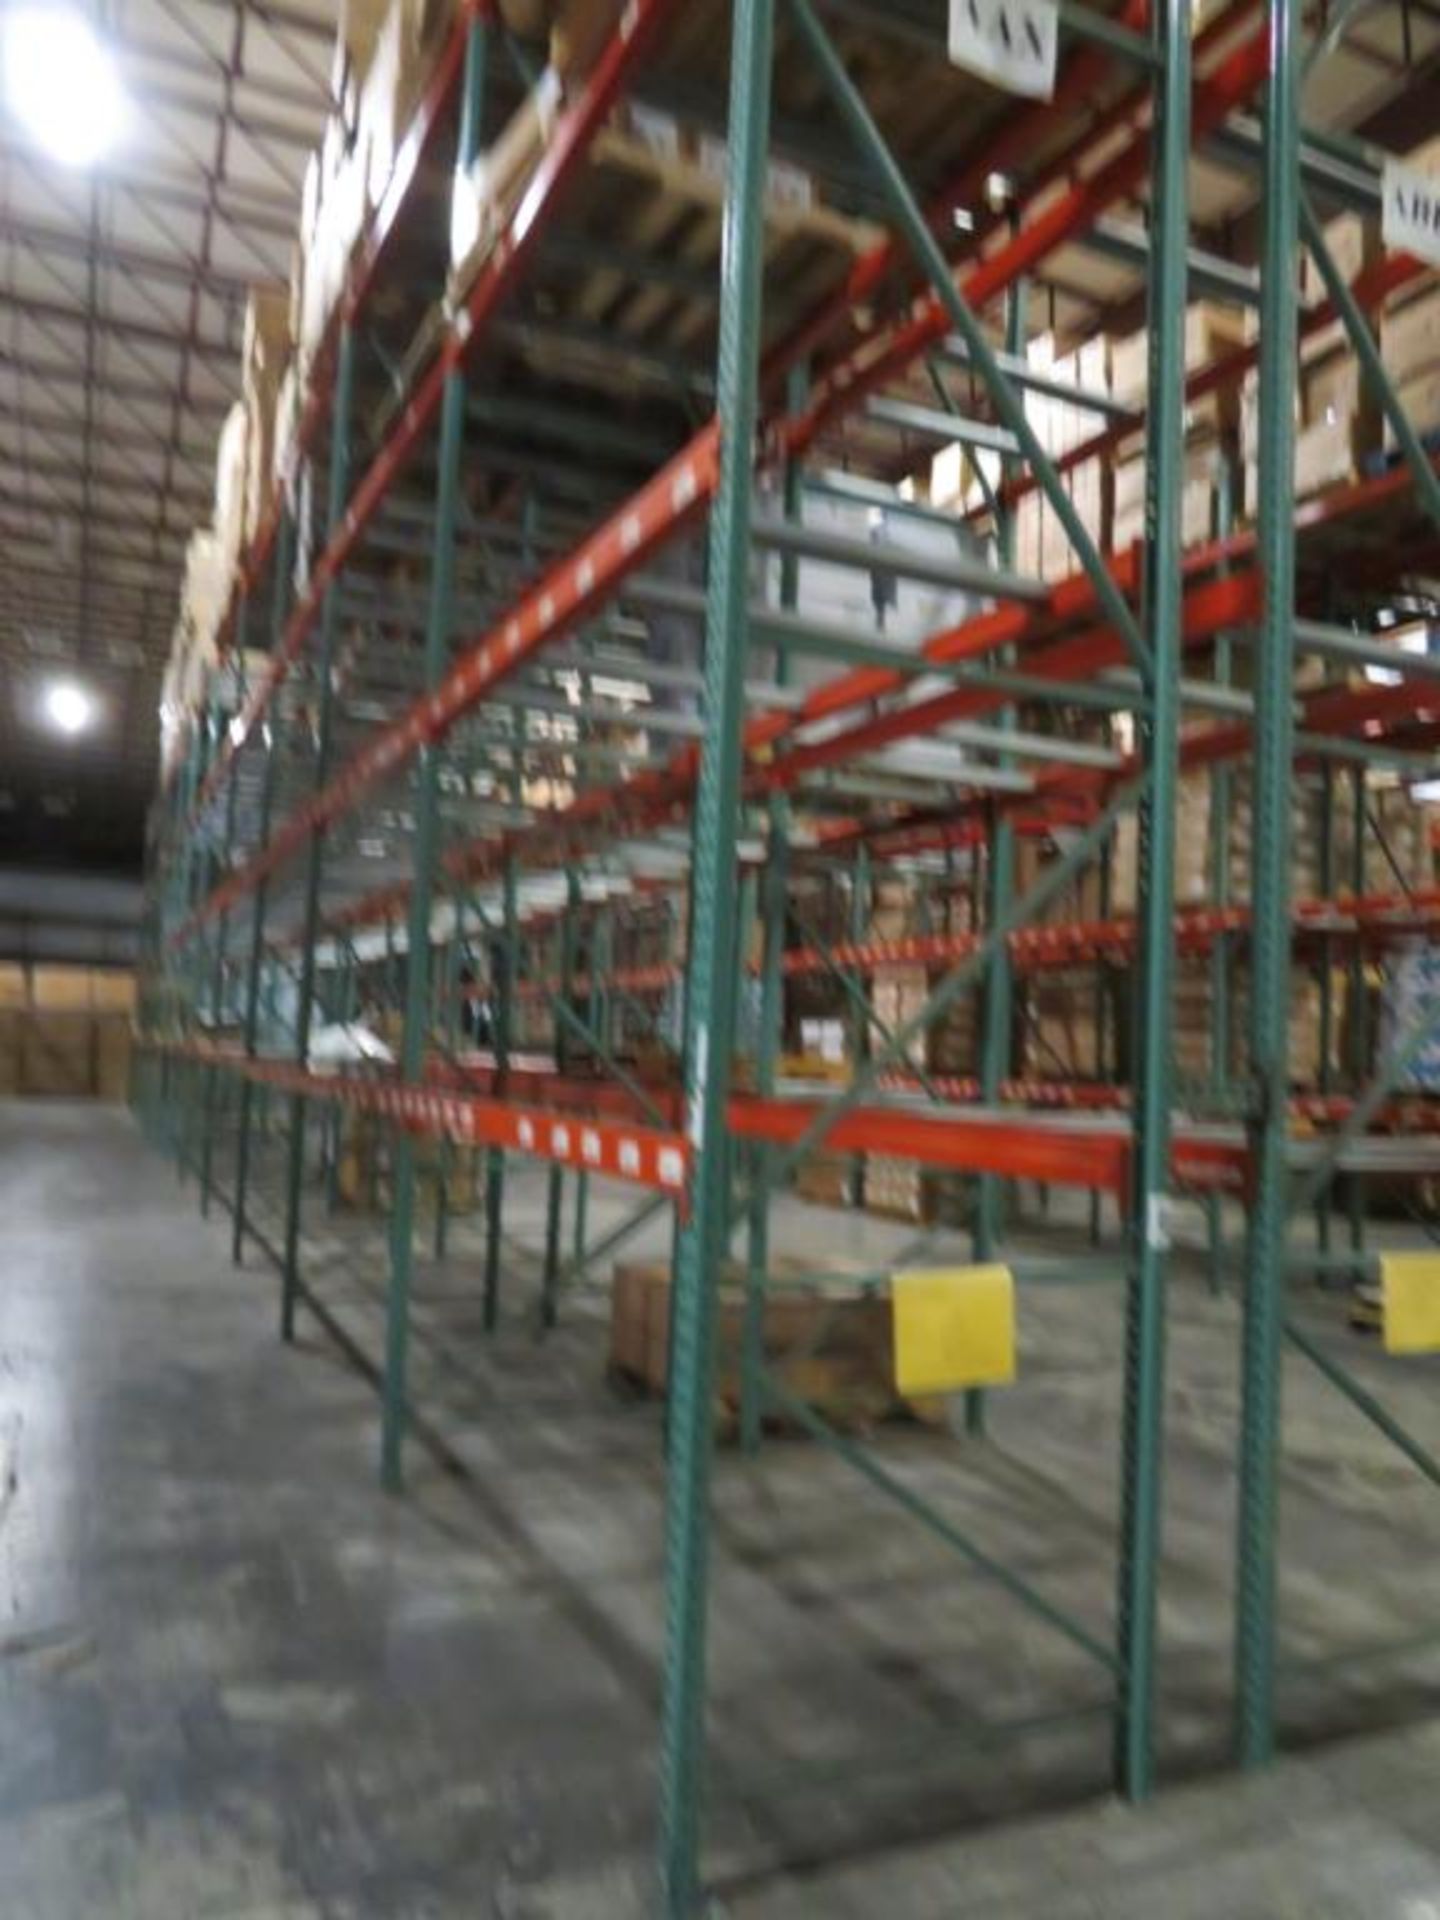 Interlake pallet racking 12 uprights 3"x 2 1/4", 44" wide and 20' tall, 88 beams 4 1/4"x 2 3/4" &